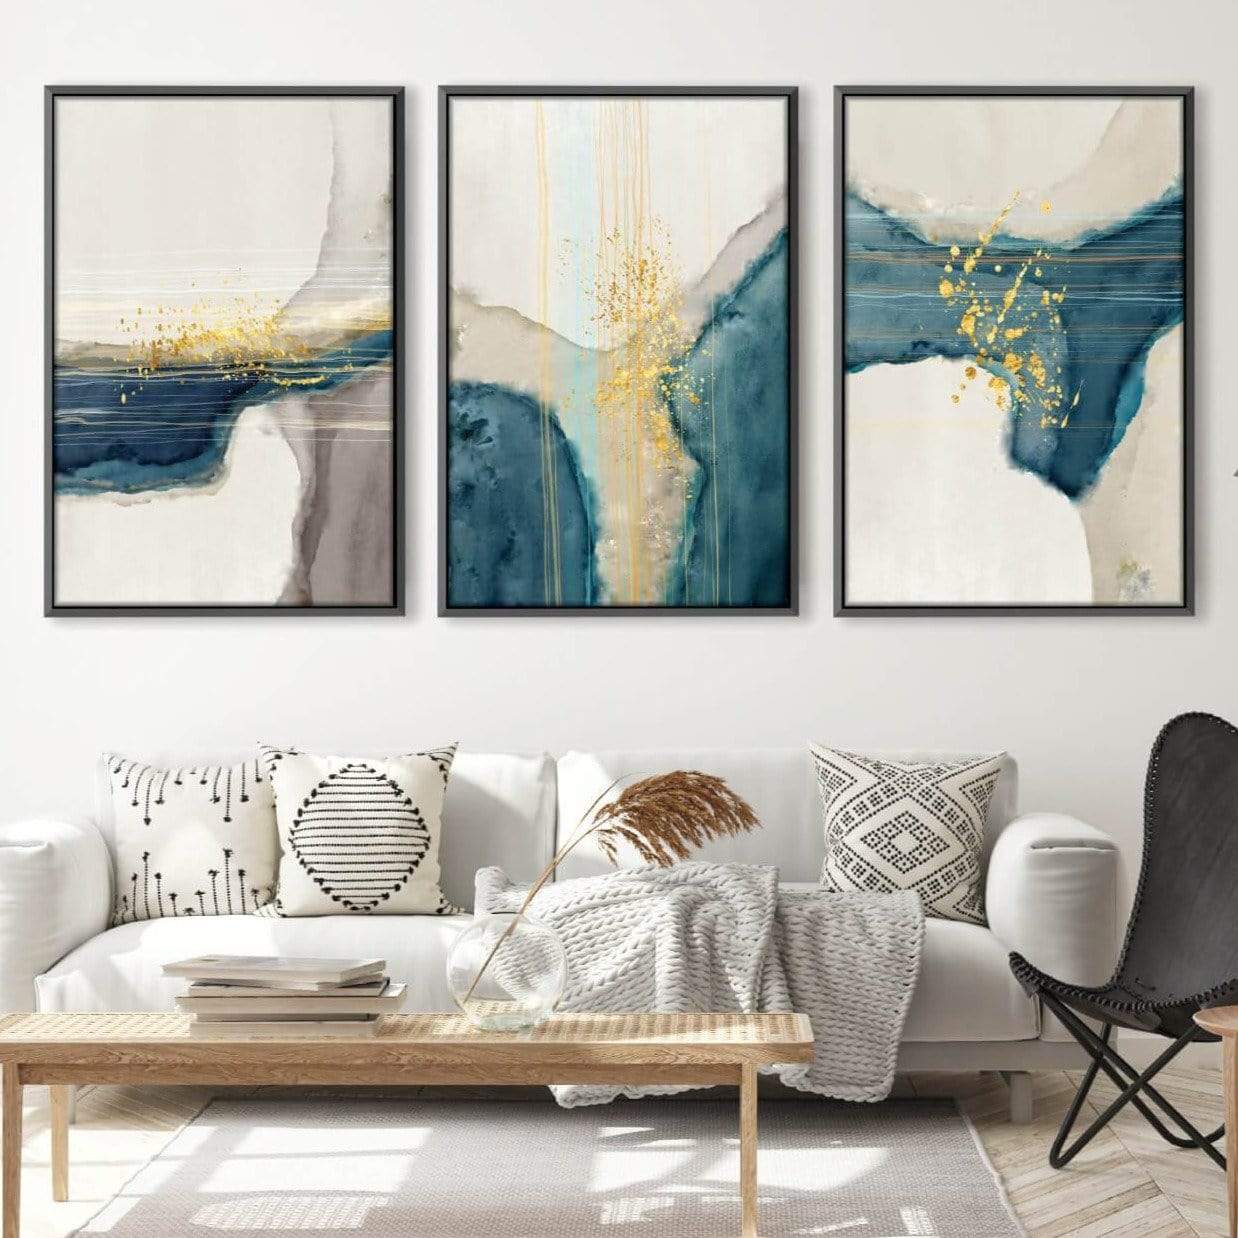 Extra large Size wall art, abstract Golden Mountain Bird Landscape Canvas  Paintings Print Poster Oil Painting For Living Room modern home -   Portugal